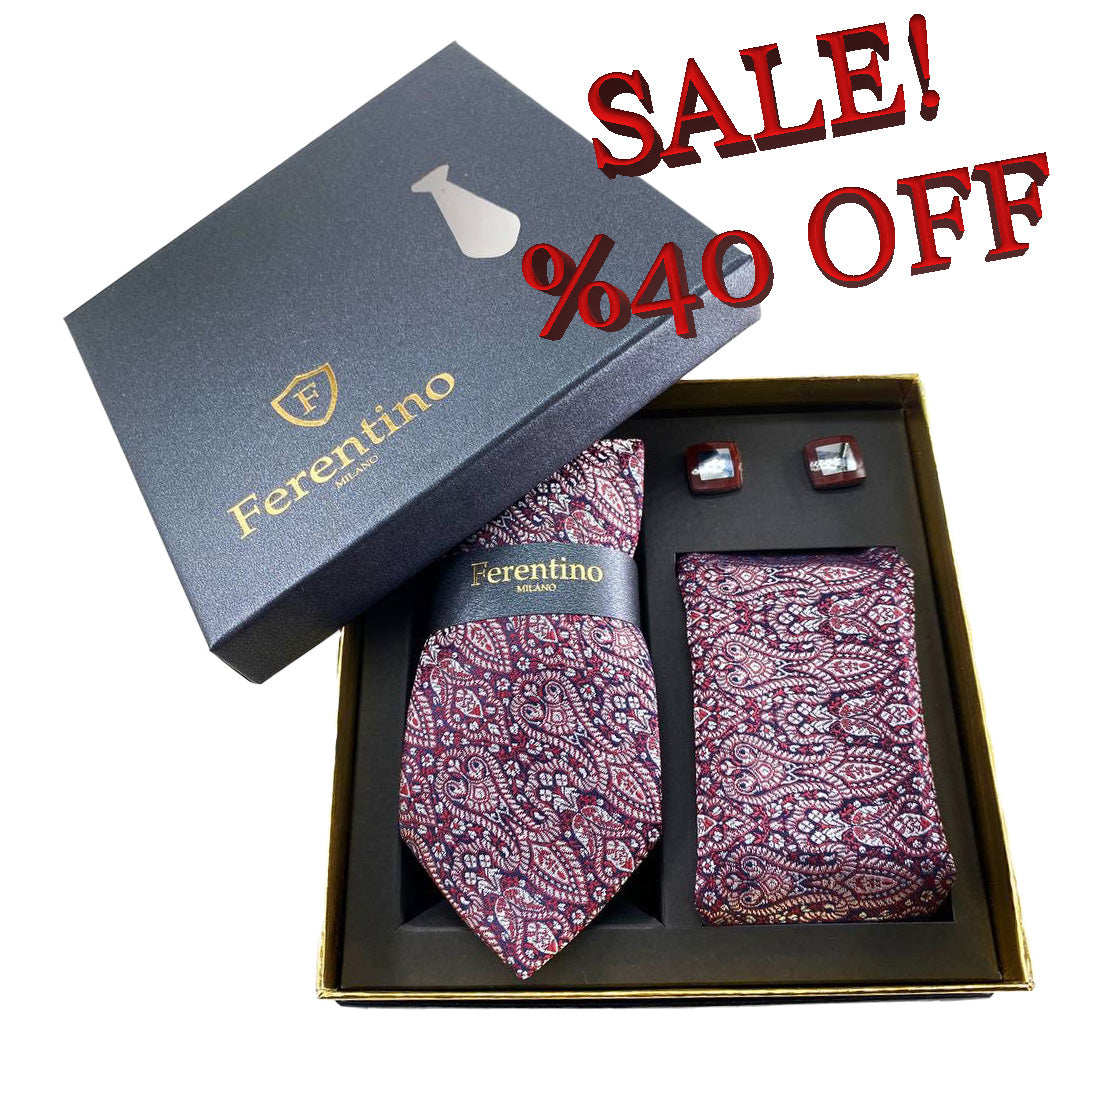 Christian Dior Monsieur Silk Bow Tie and Pocket Square Gift 